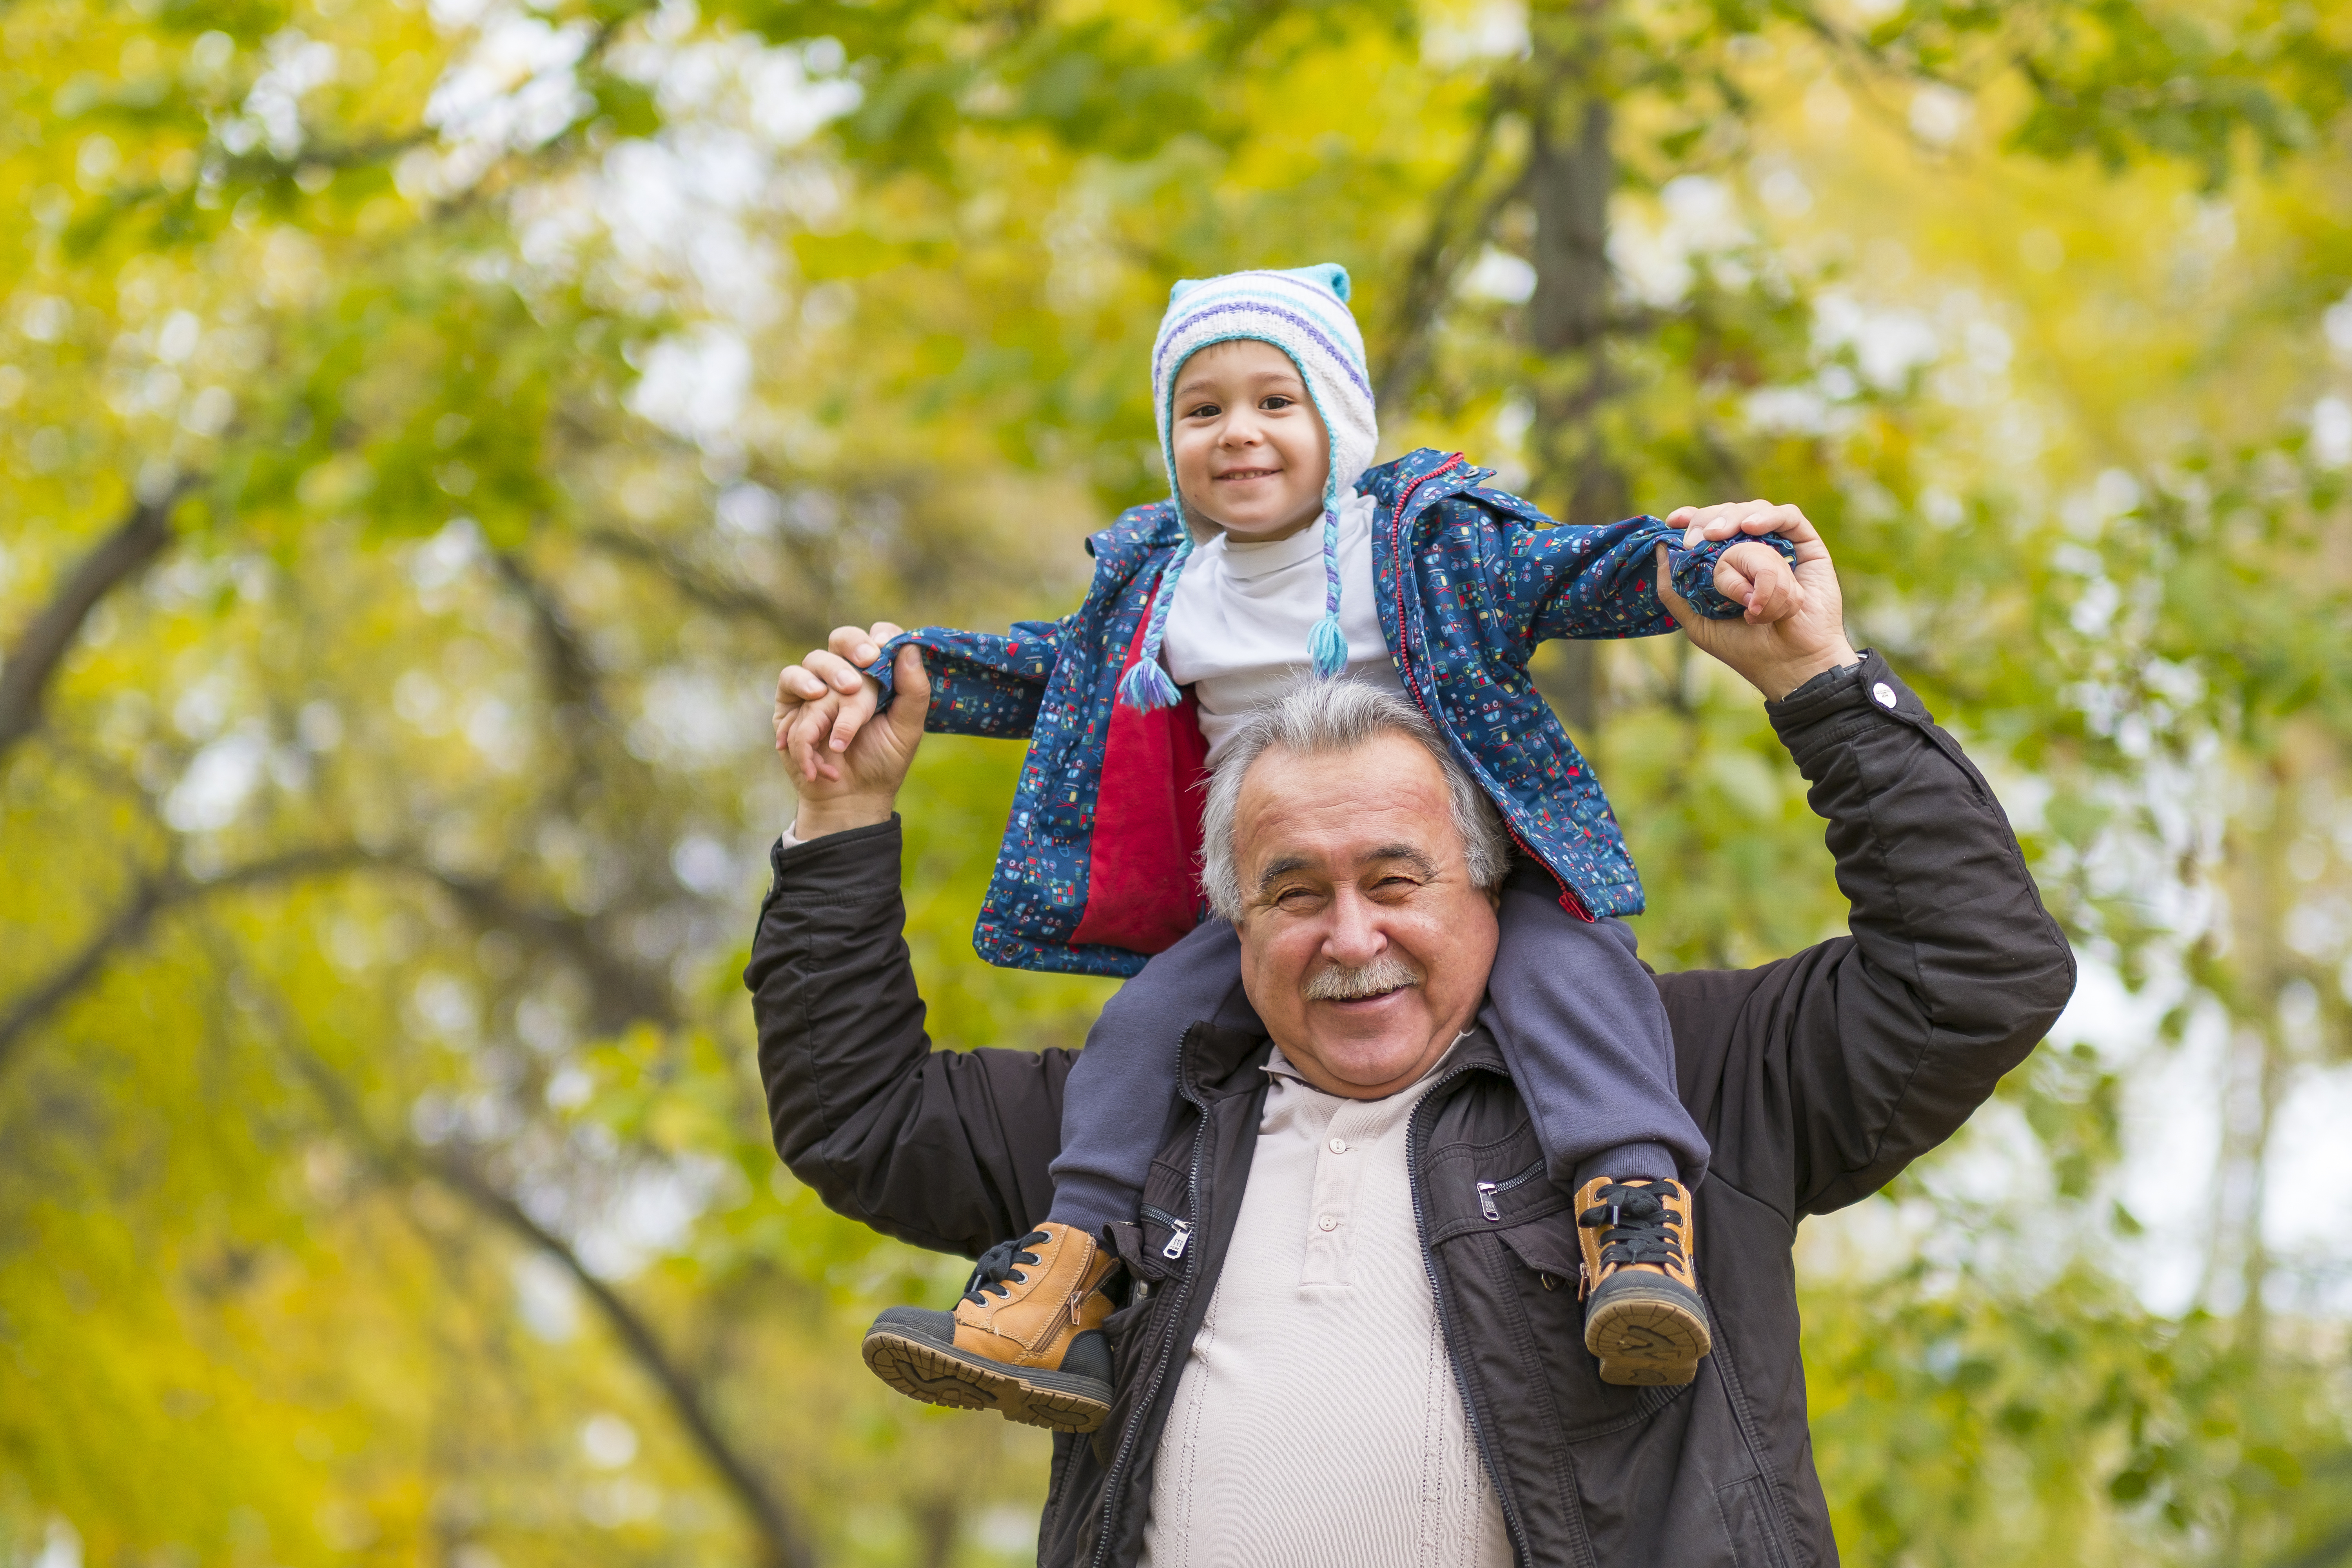 older adult man with toddler sitting on his shoulders, both are smiling